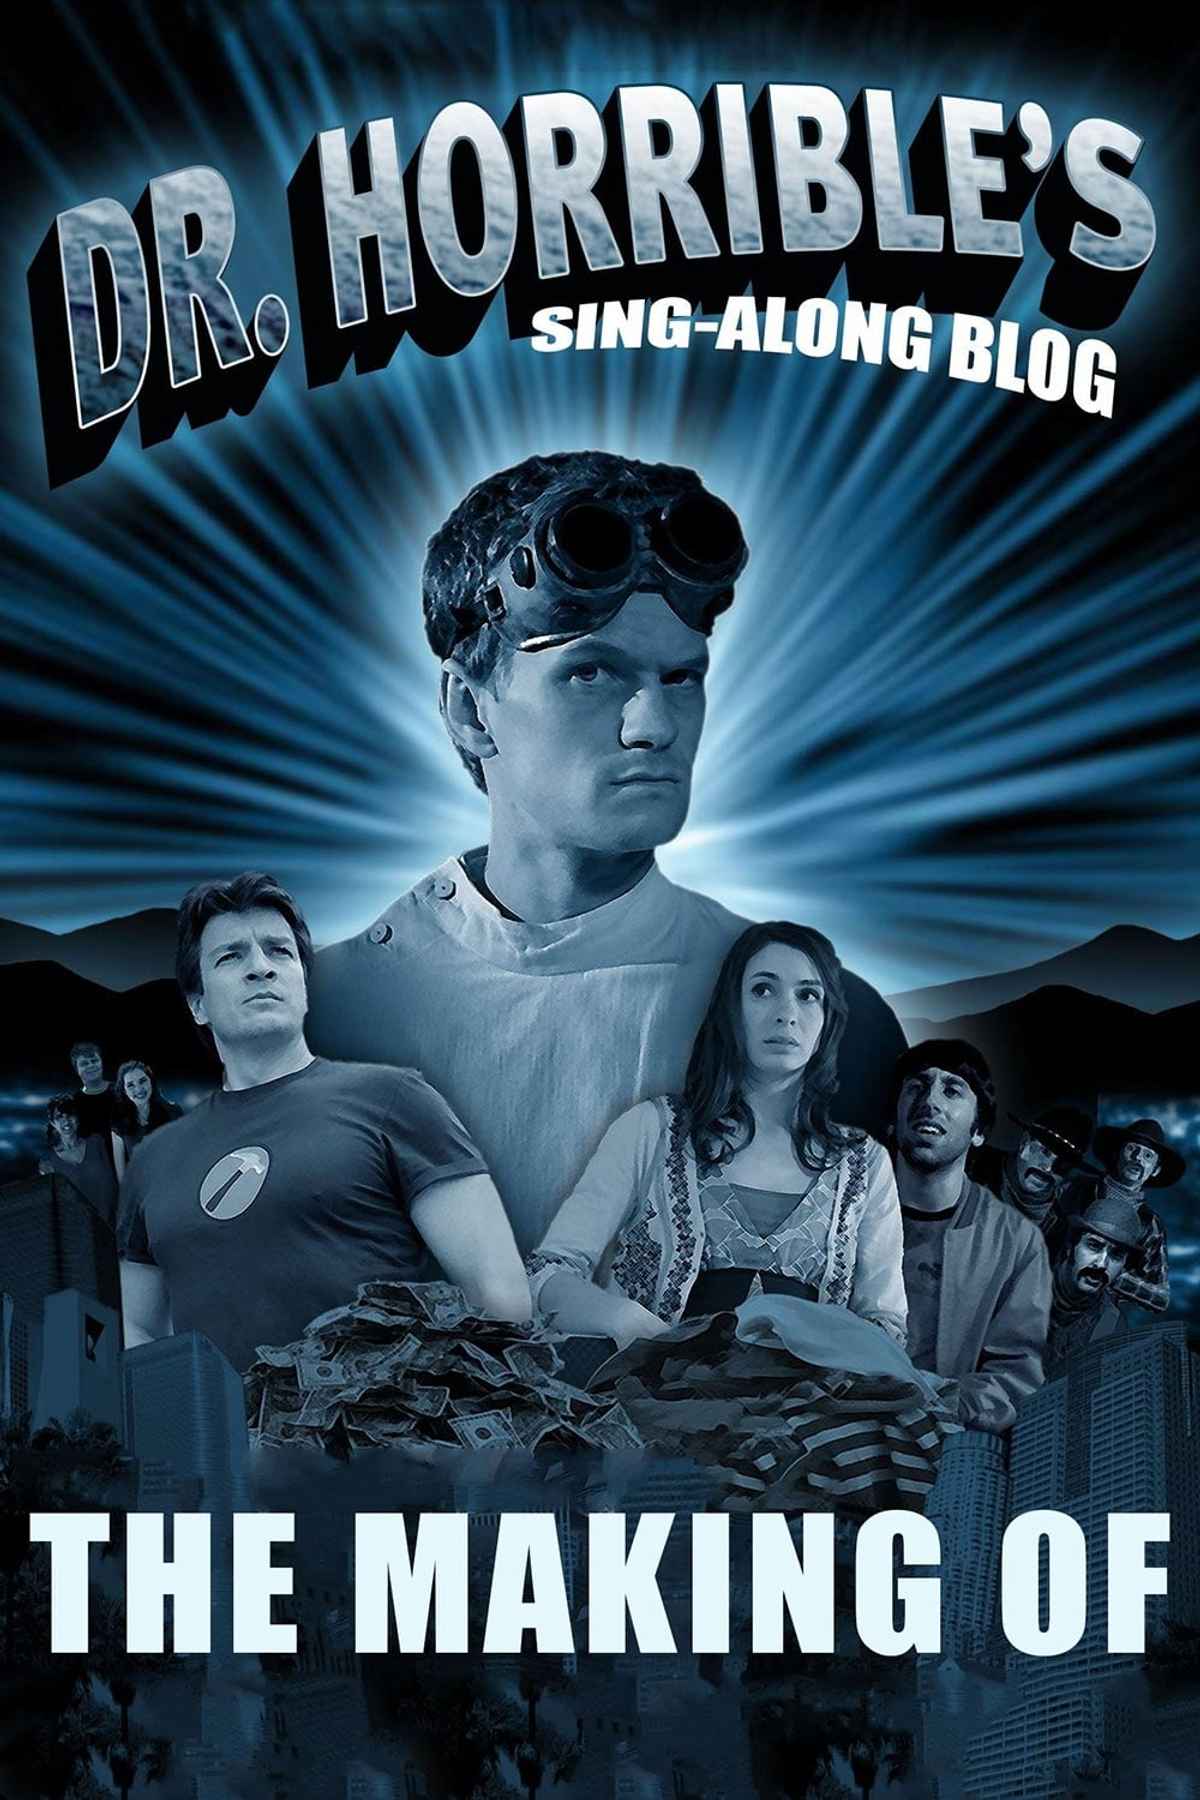 The making of 'Dr. Horrible's Sing-Along Blog